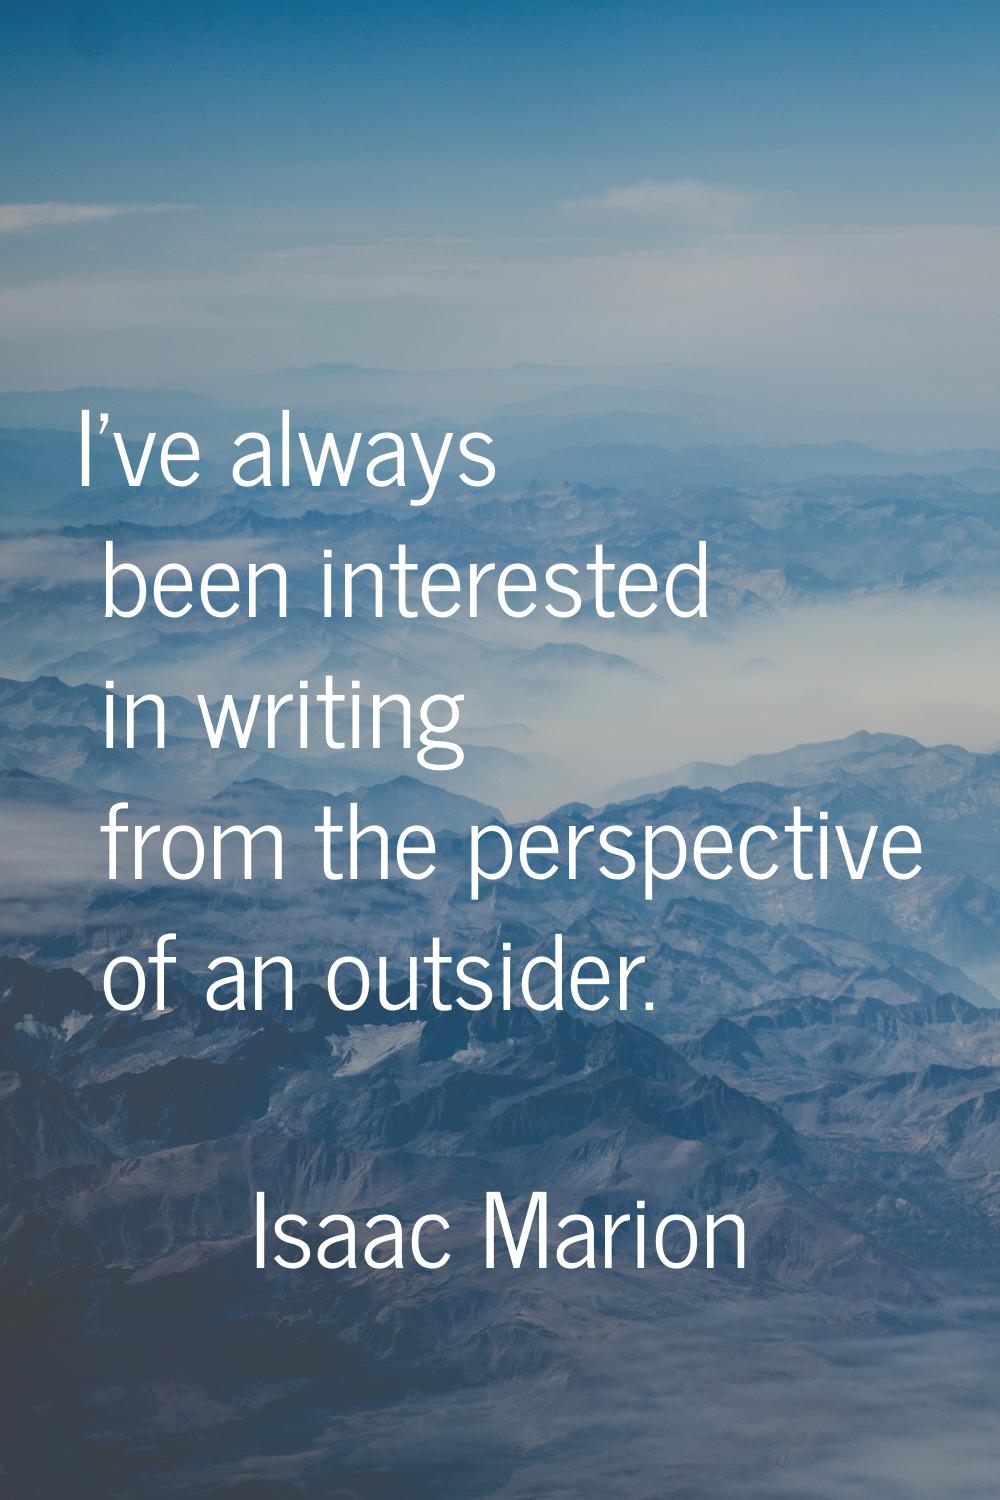 I've always been interested in writing from the perspective of an outsider.